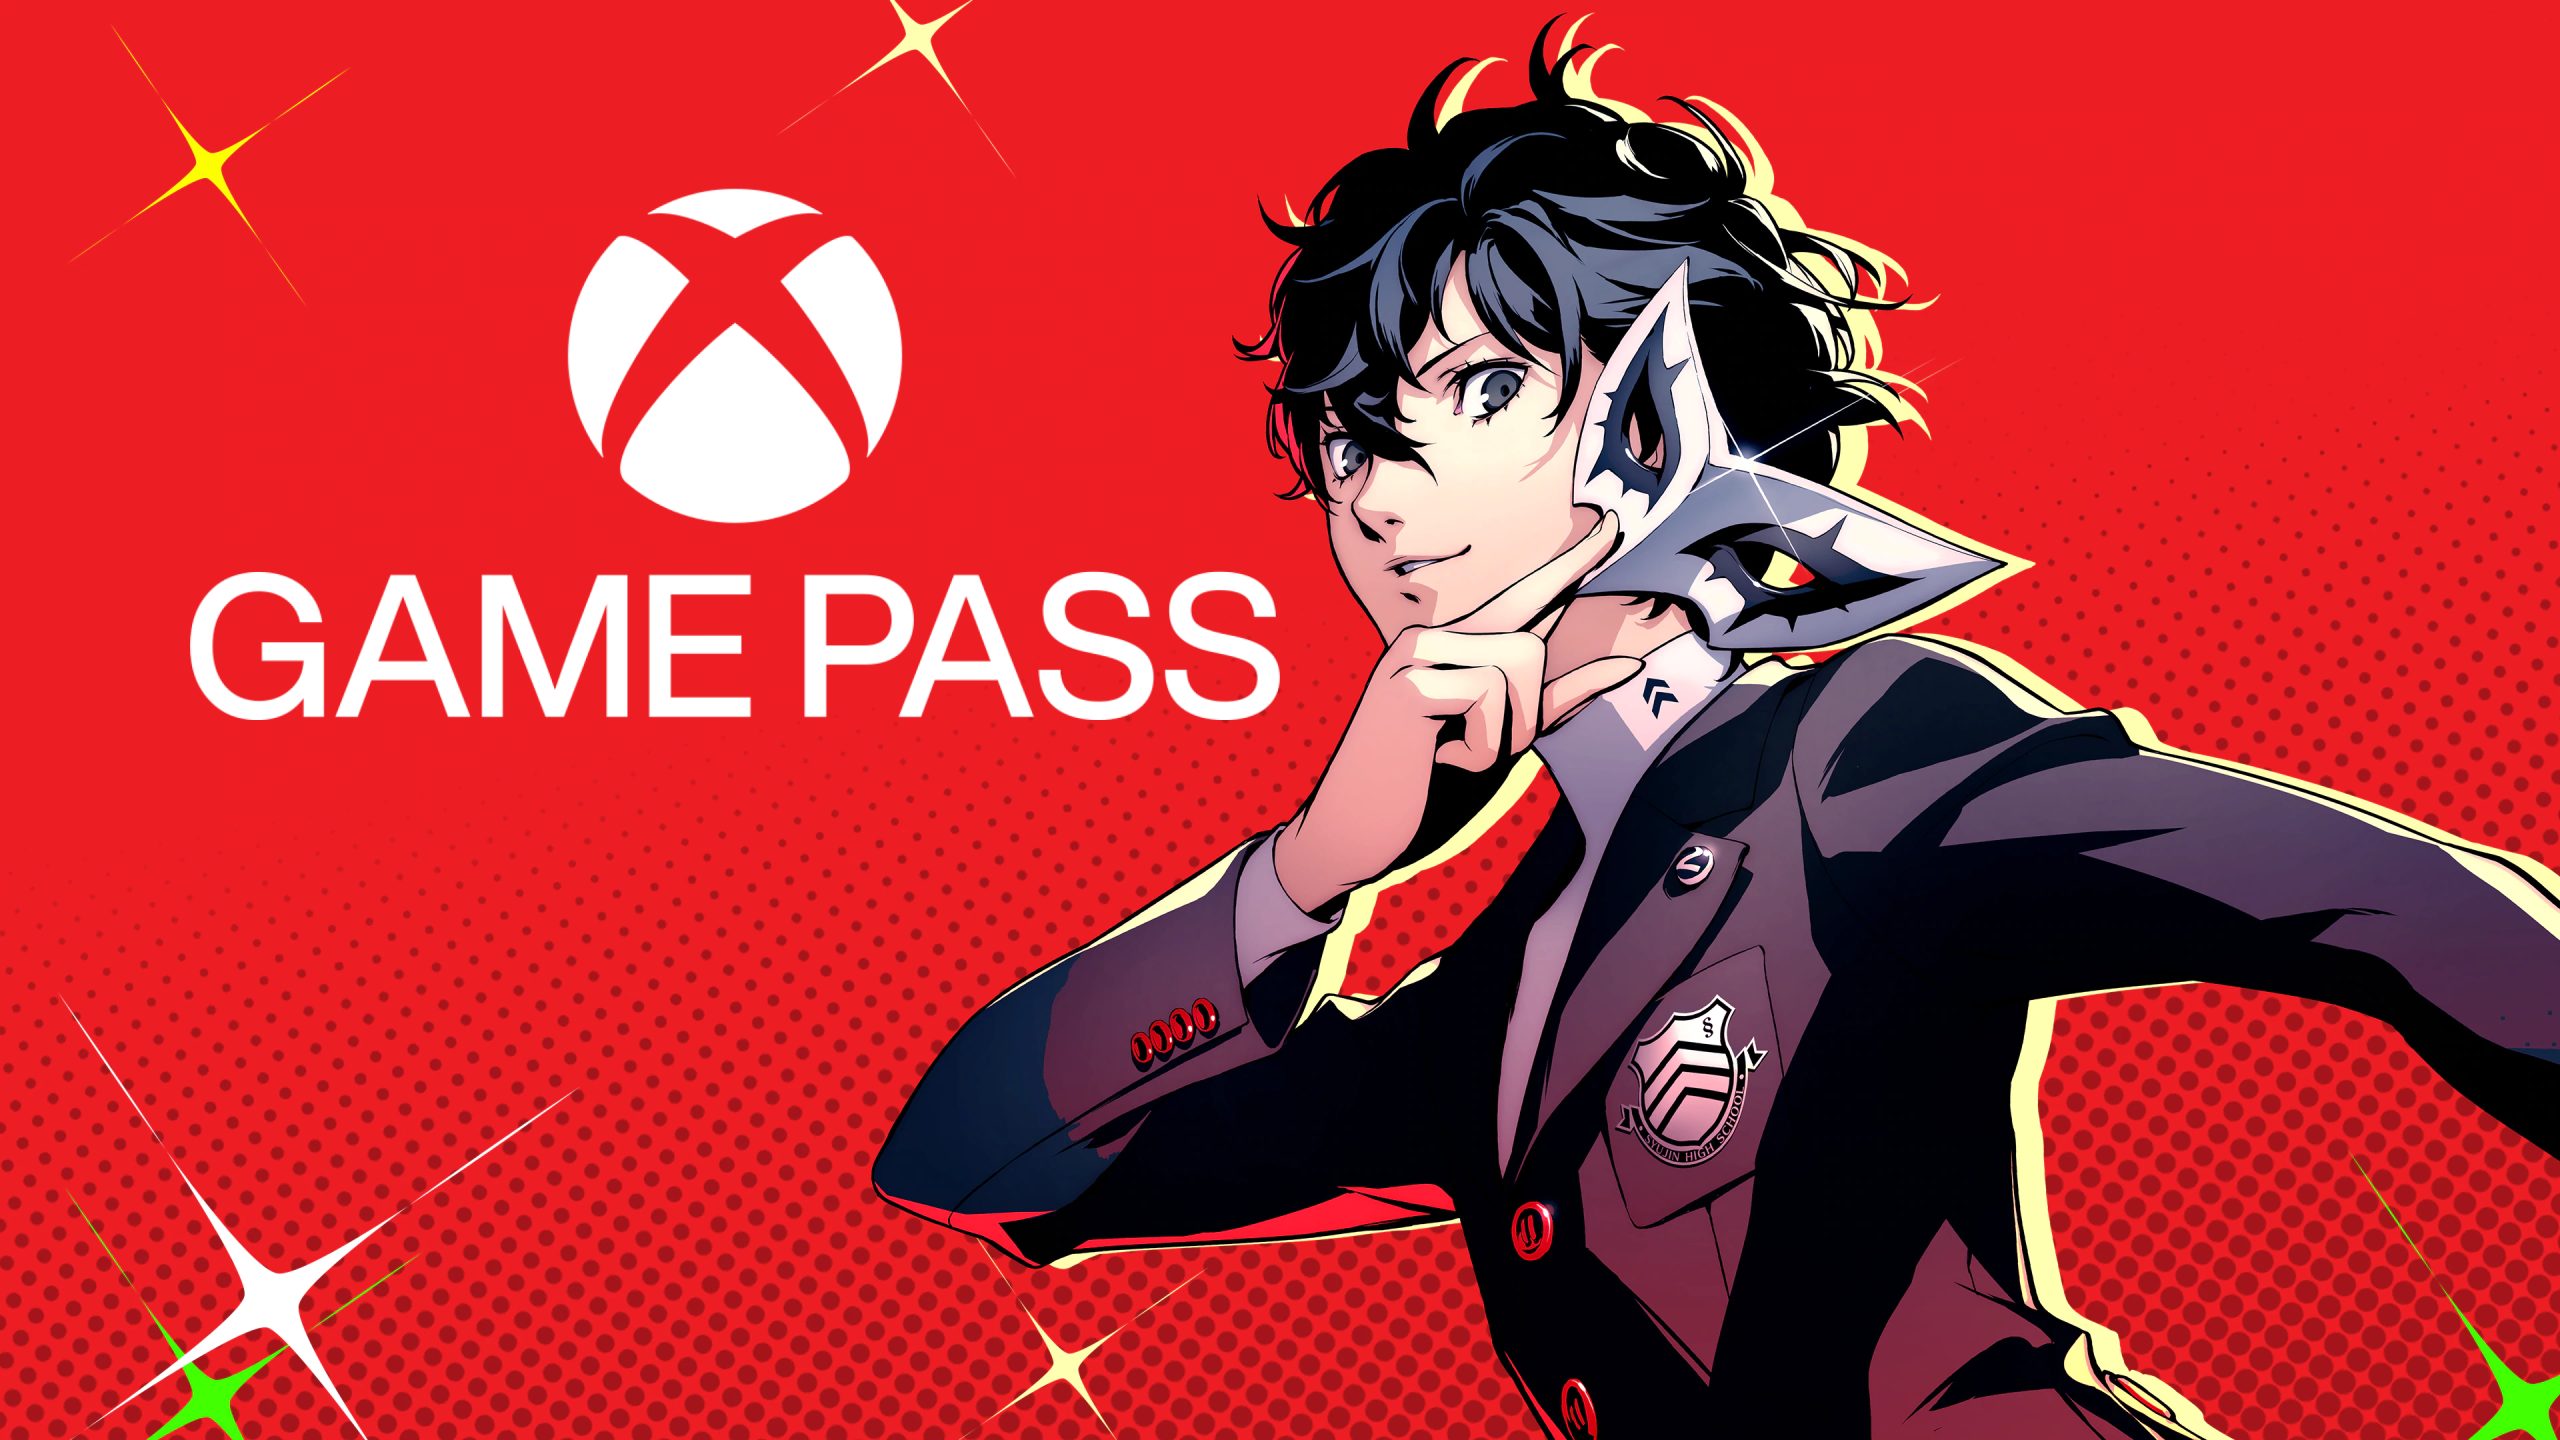 Persona 5 Royal, Gunfire Reborn, Soma, and more are coming to Xbox Game Pass